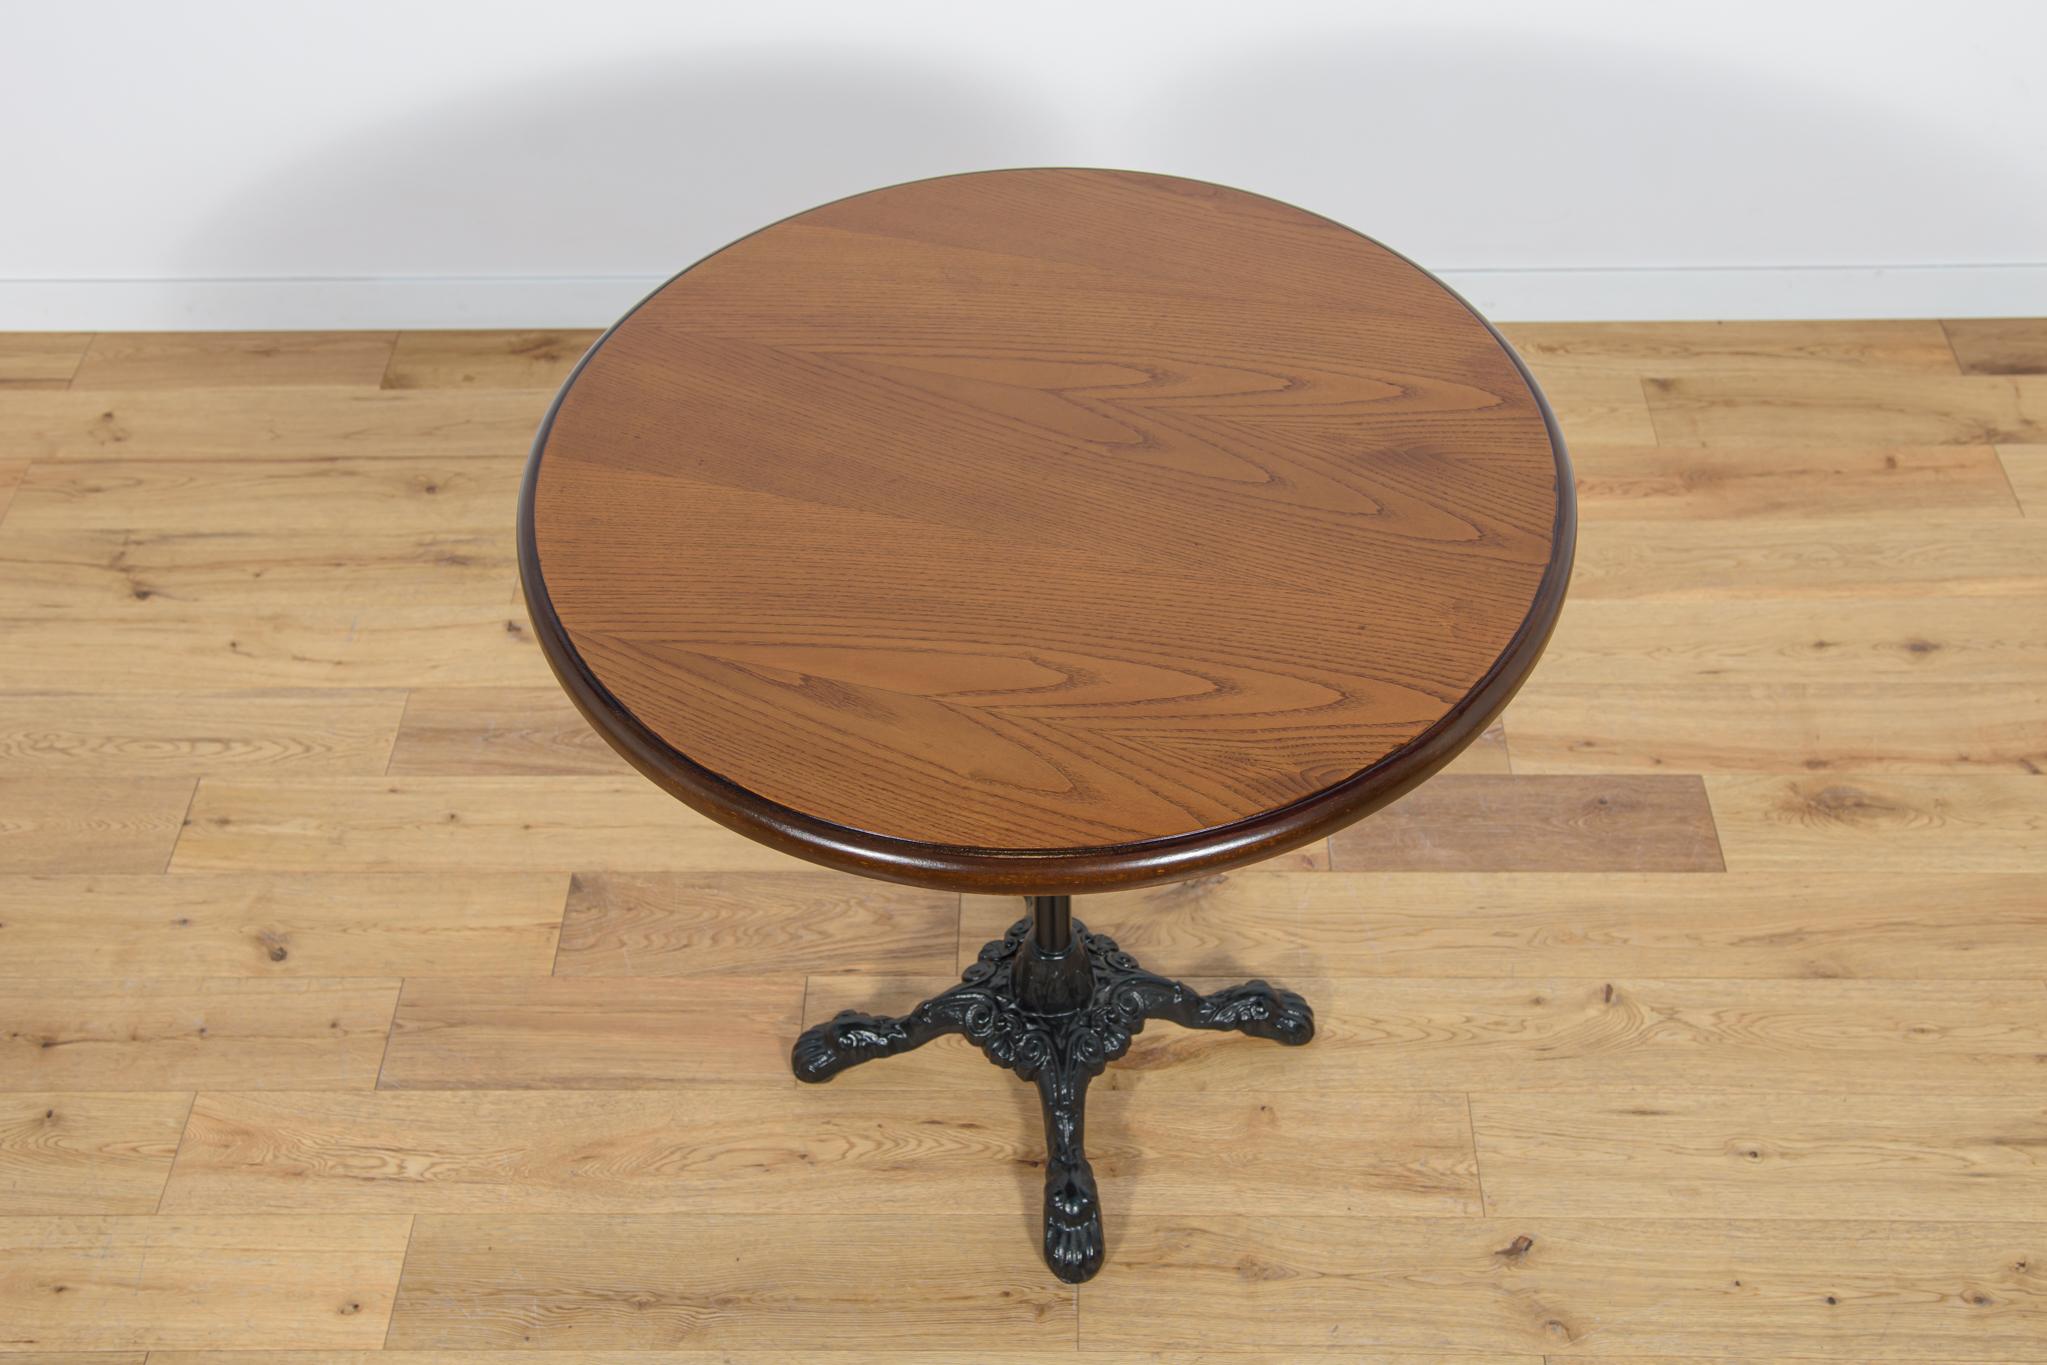 Powder-Coated Art Nouveu Cast Iron and Wood Coffee Table, 1920s For Sale